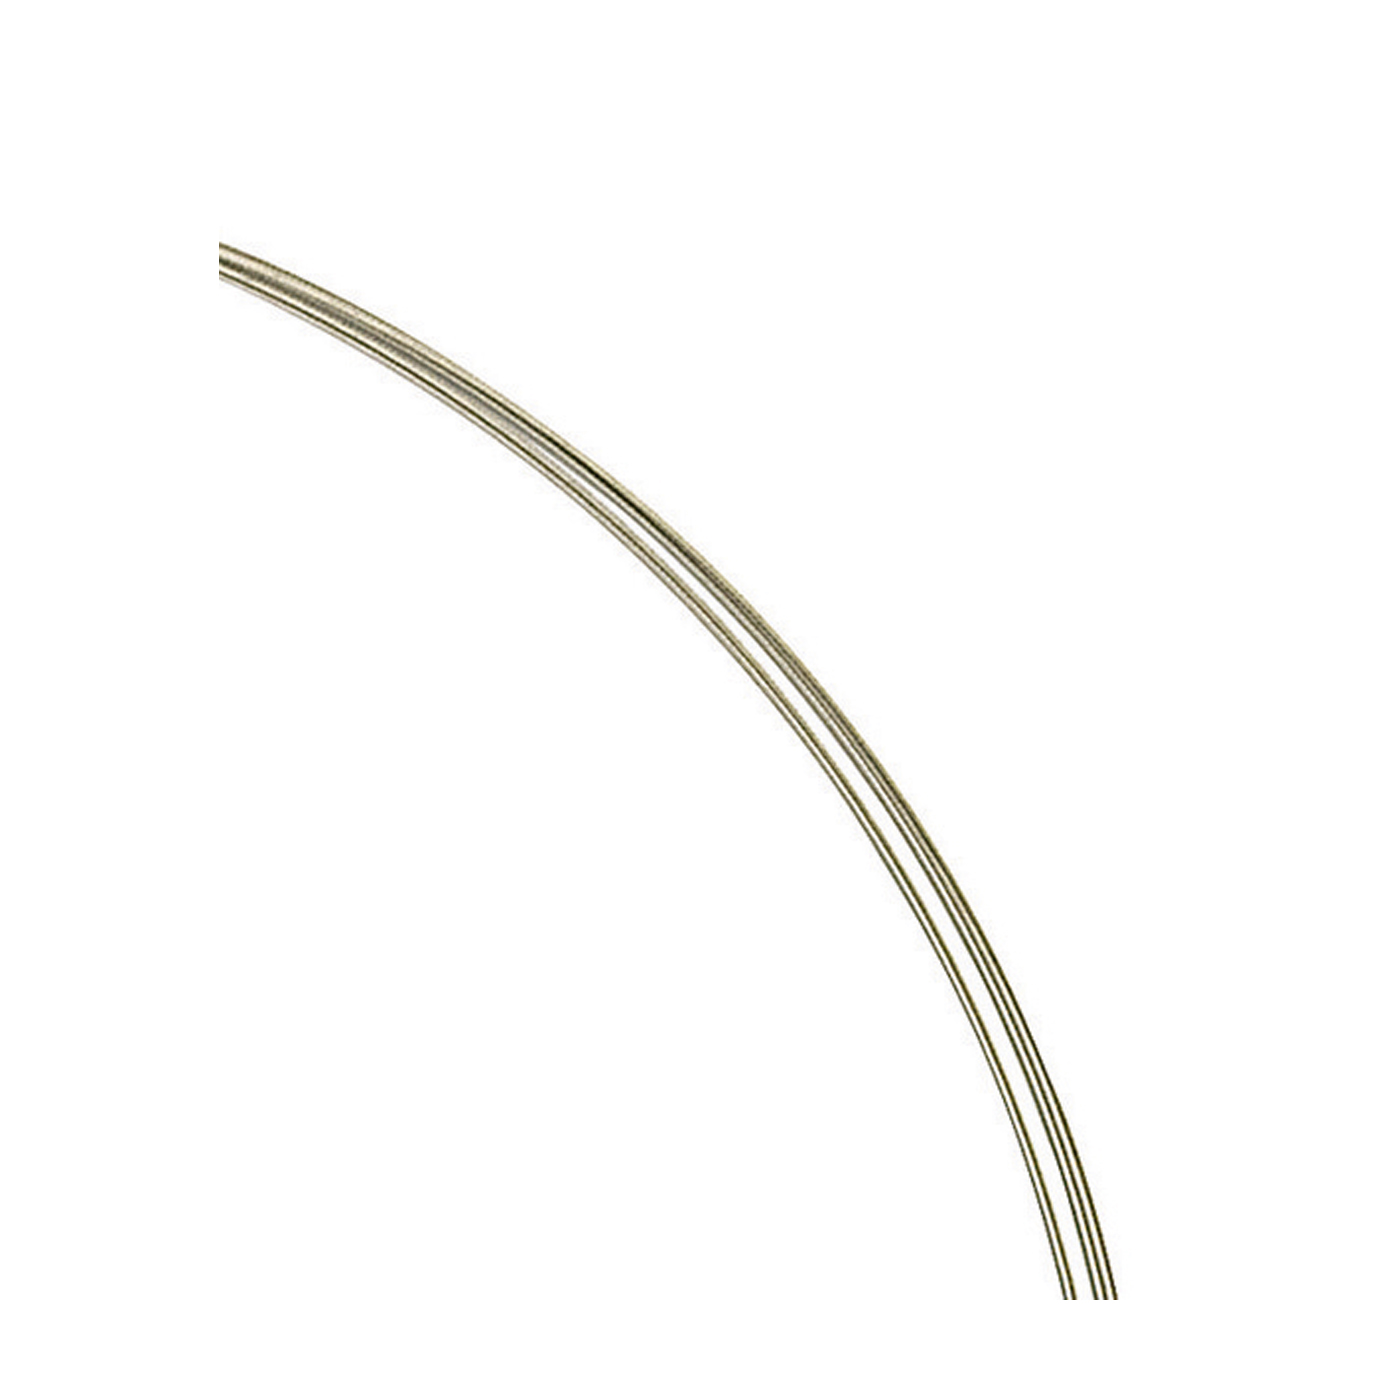 Steel Cable Neck Wire, 5-Strand, ø 0.5 mm, 42 cm - 1 piece